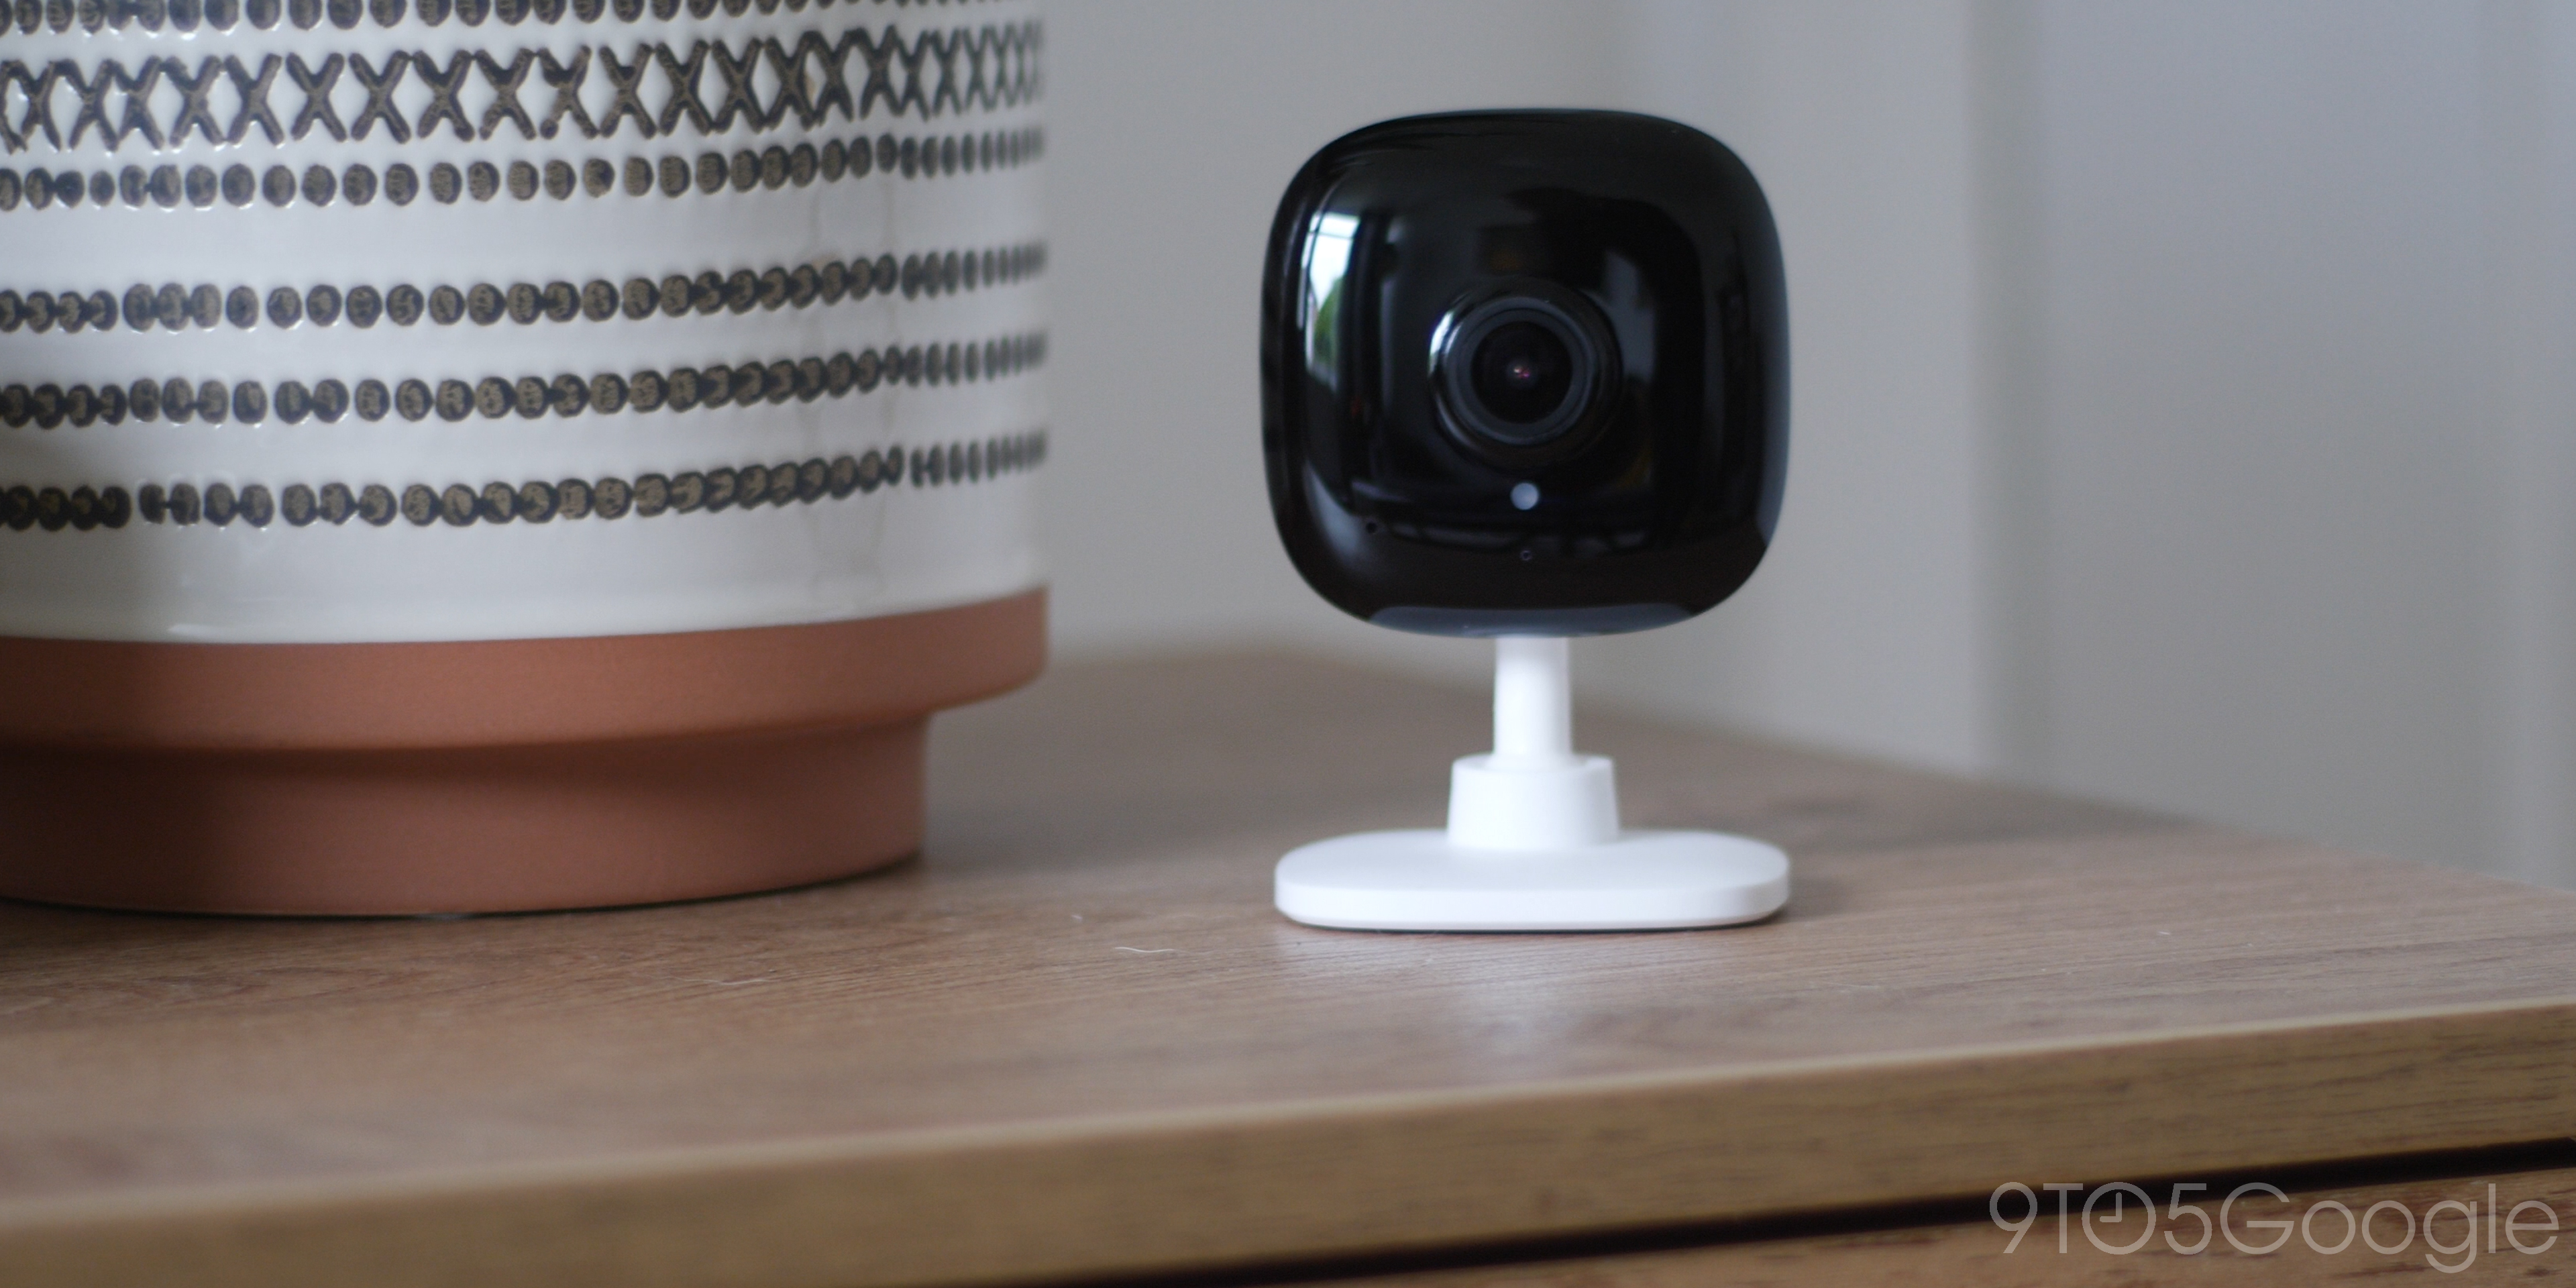 cameras compatible with google home